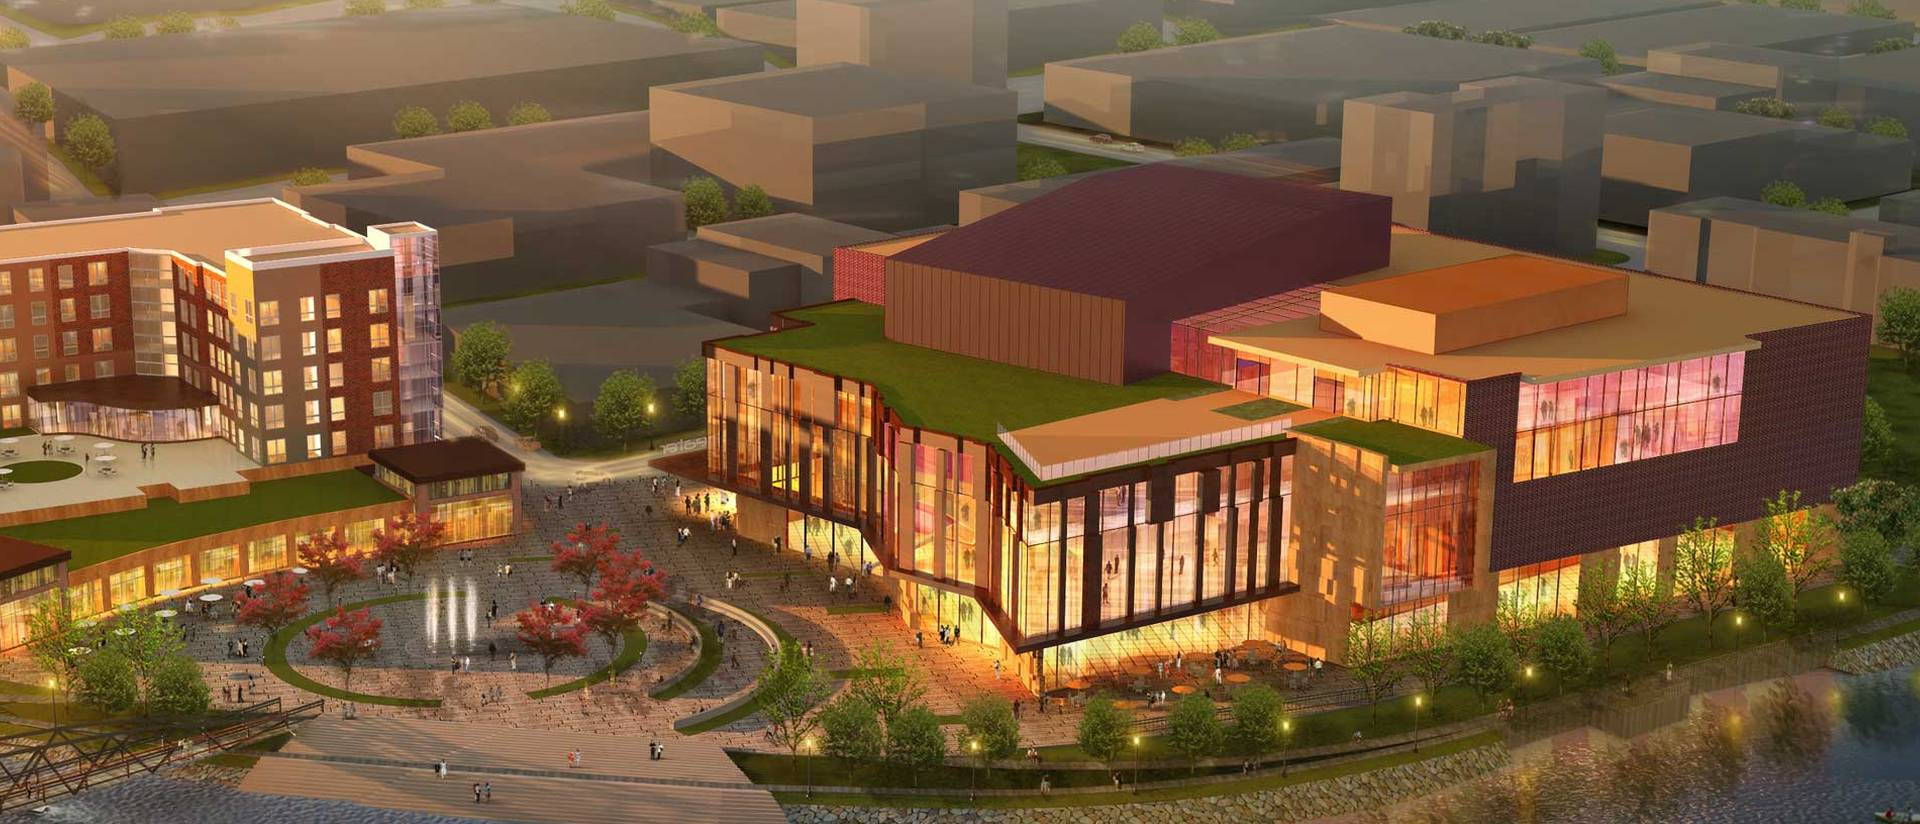 Confluence Project arts center artist's rendering